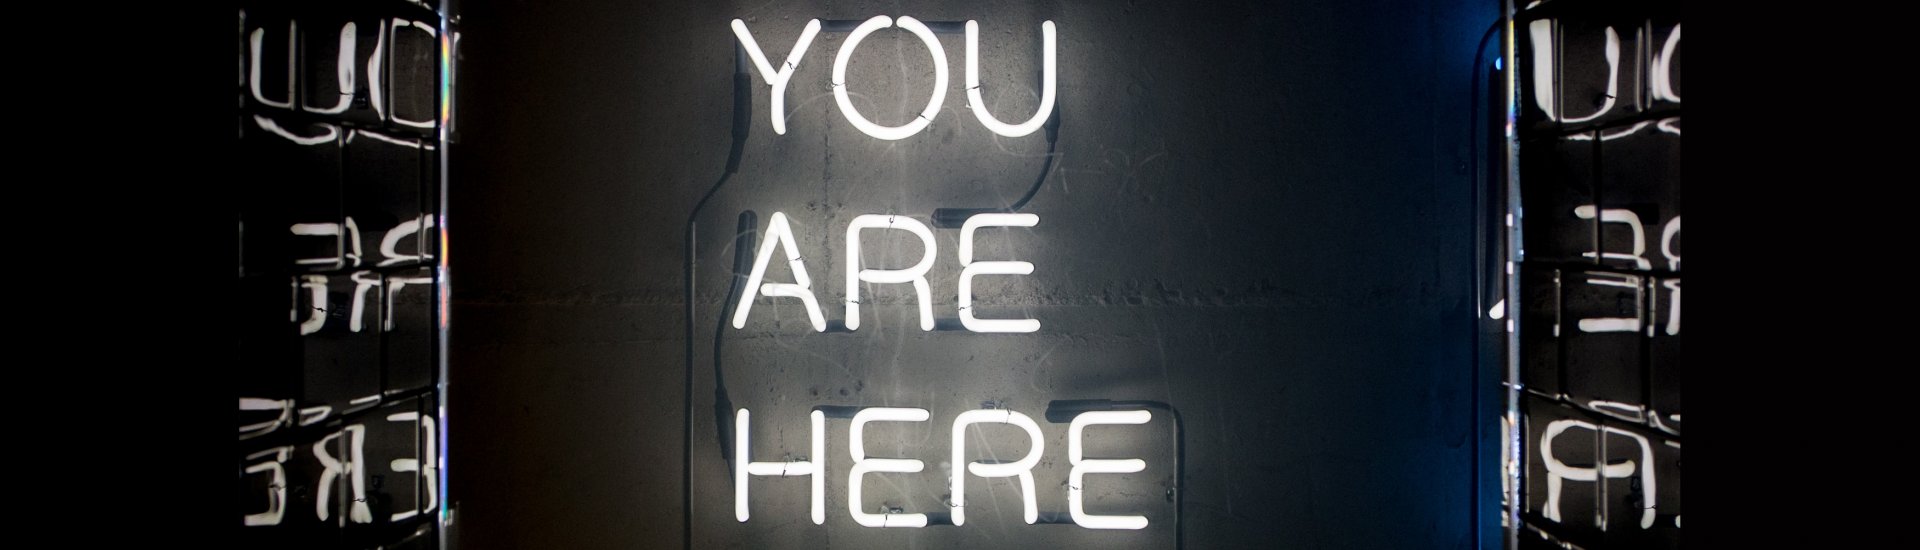 You are here in neonletters.